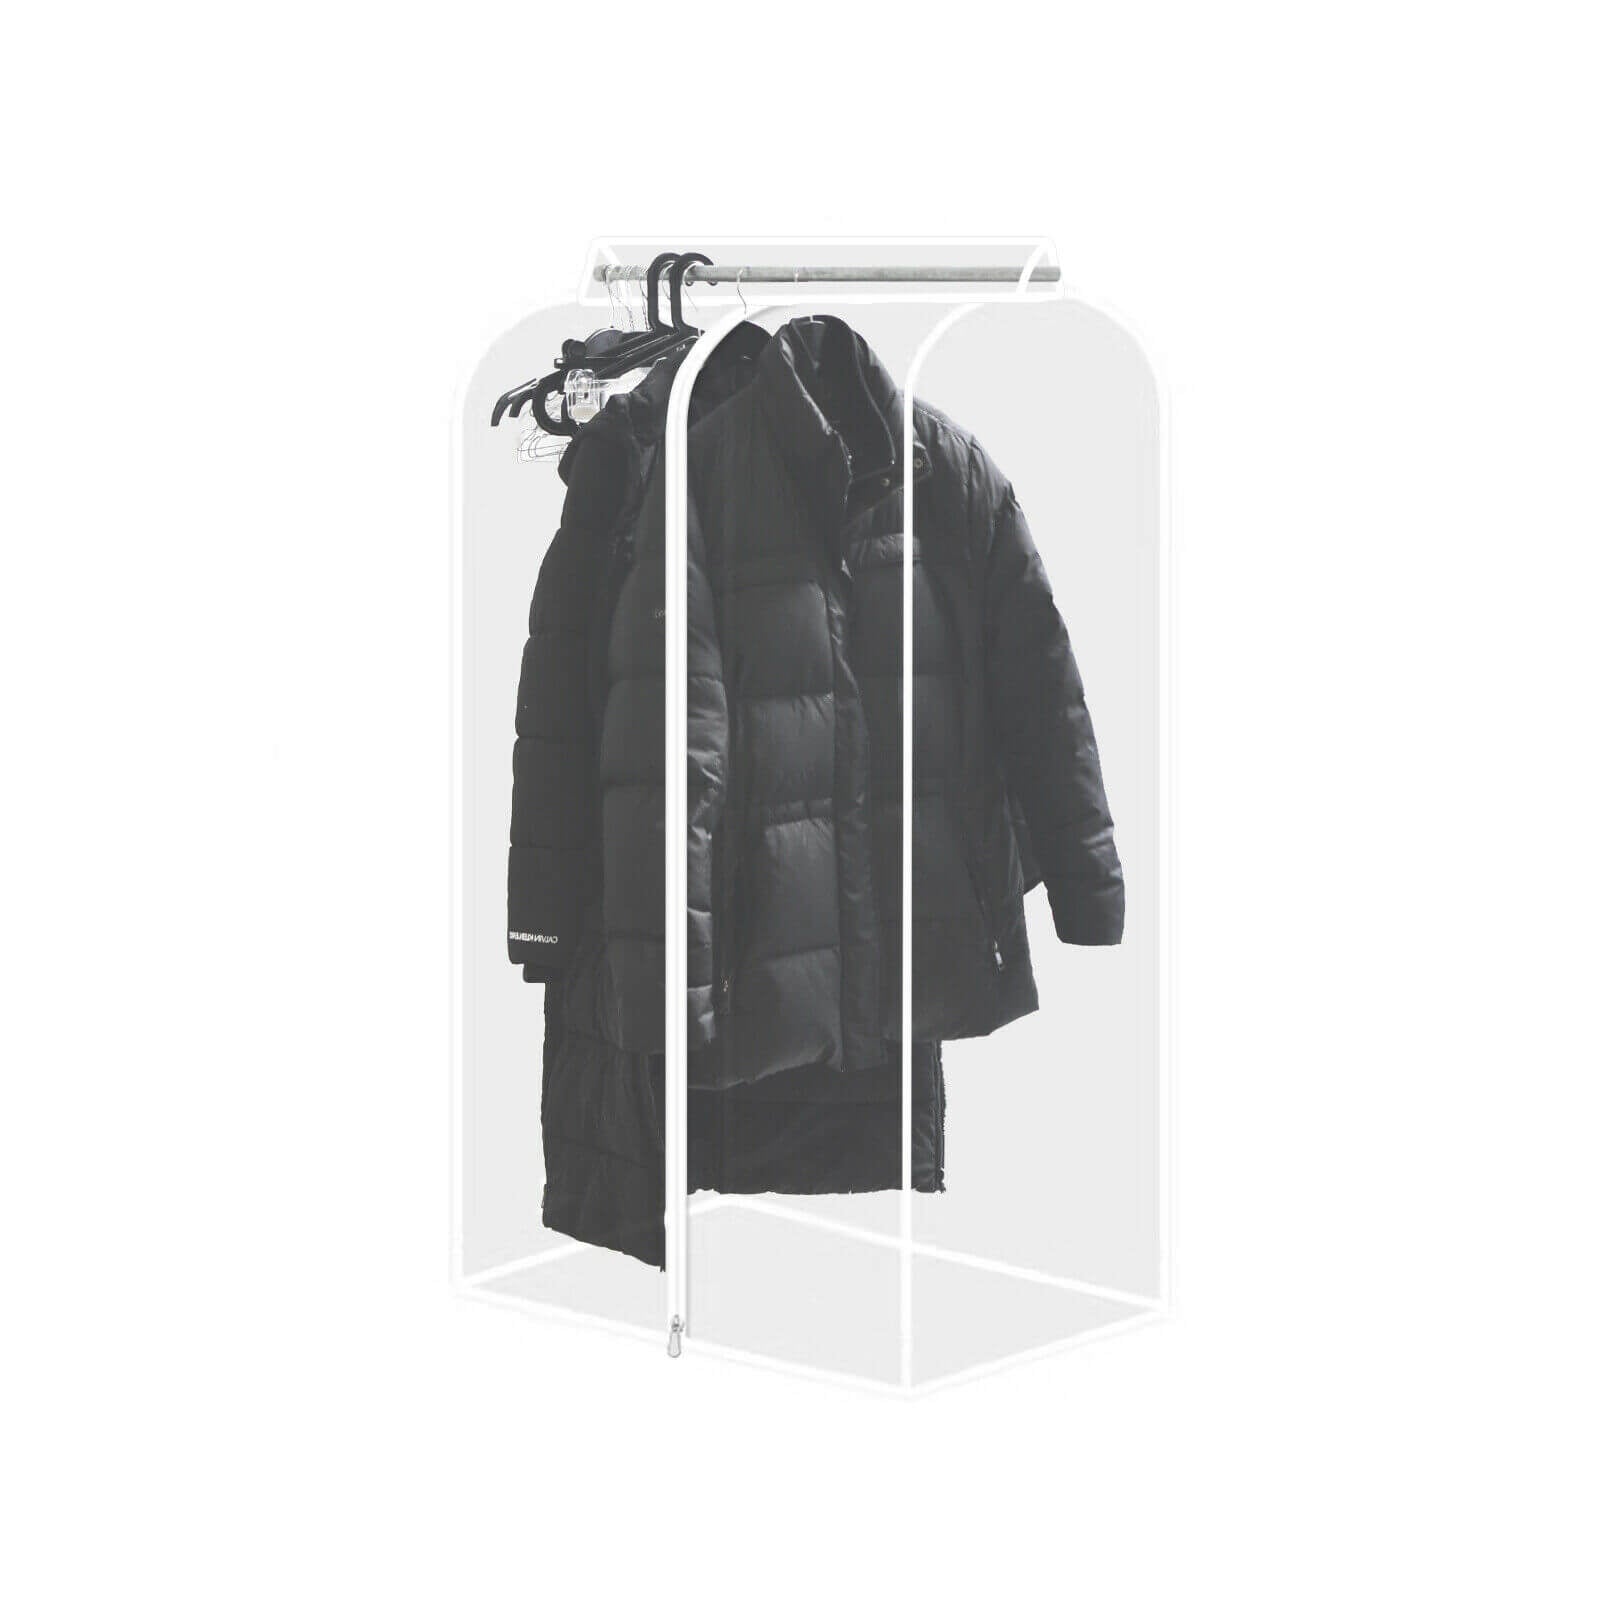 using display of Hanging Garment Dust Cover Organizer